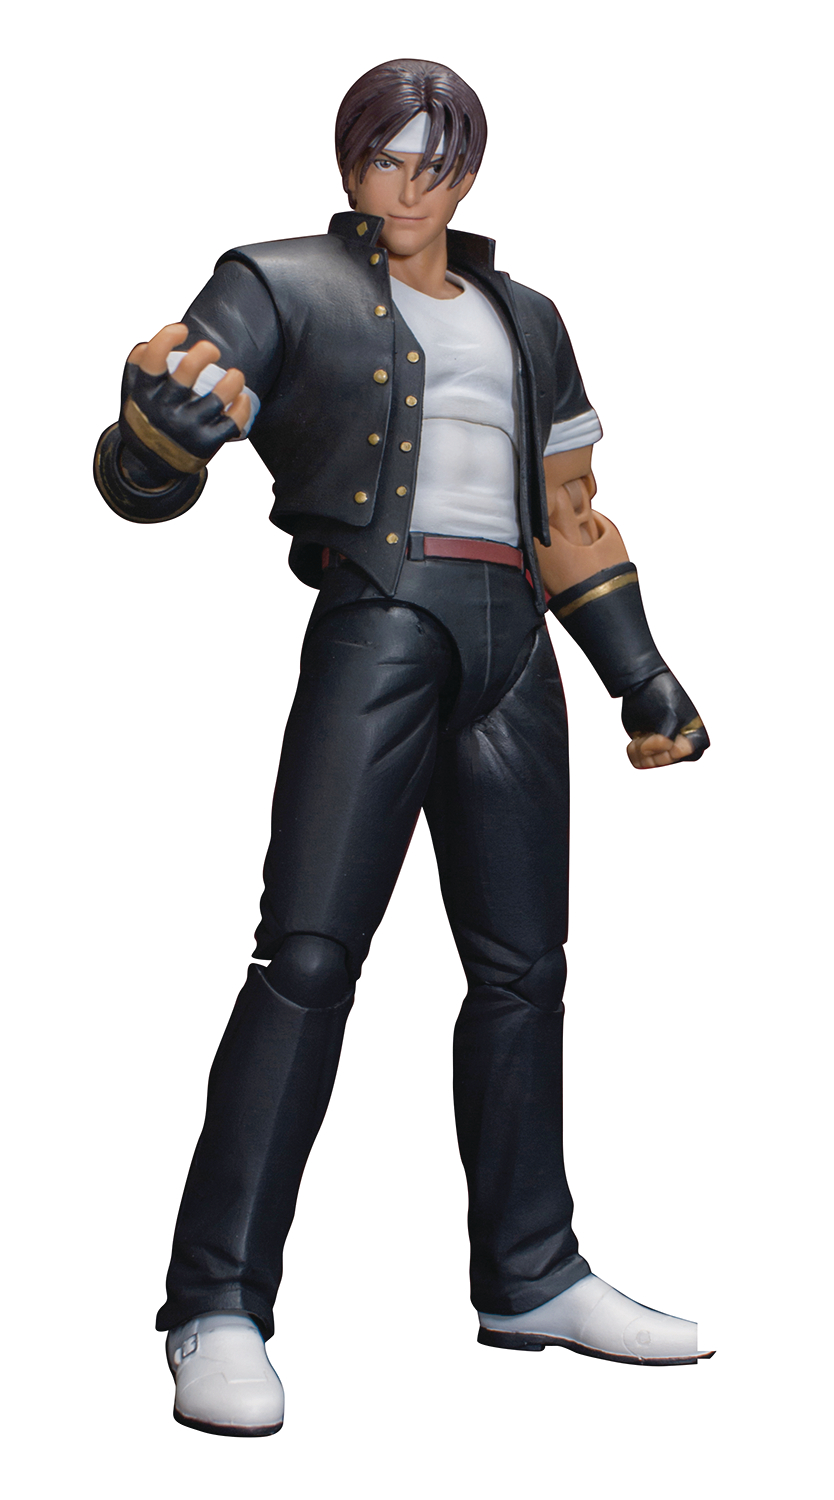 Kyo Kusanagi The King of Fighters 98 Storm Collectibles Original